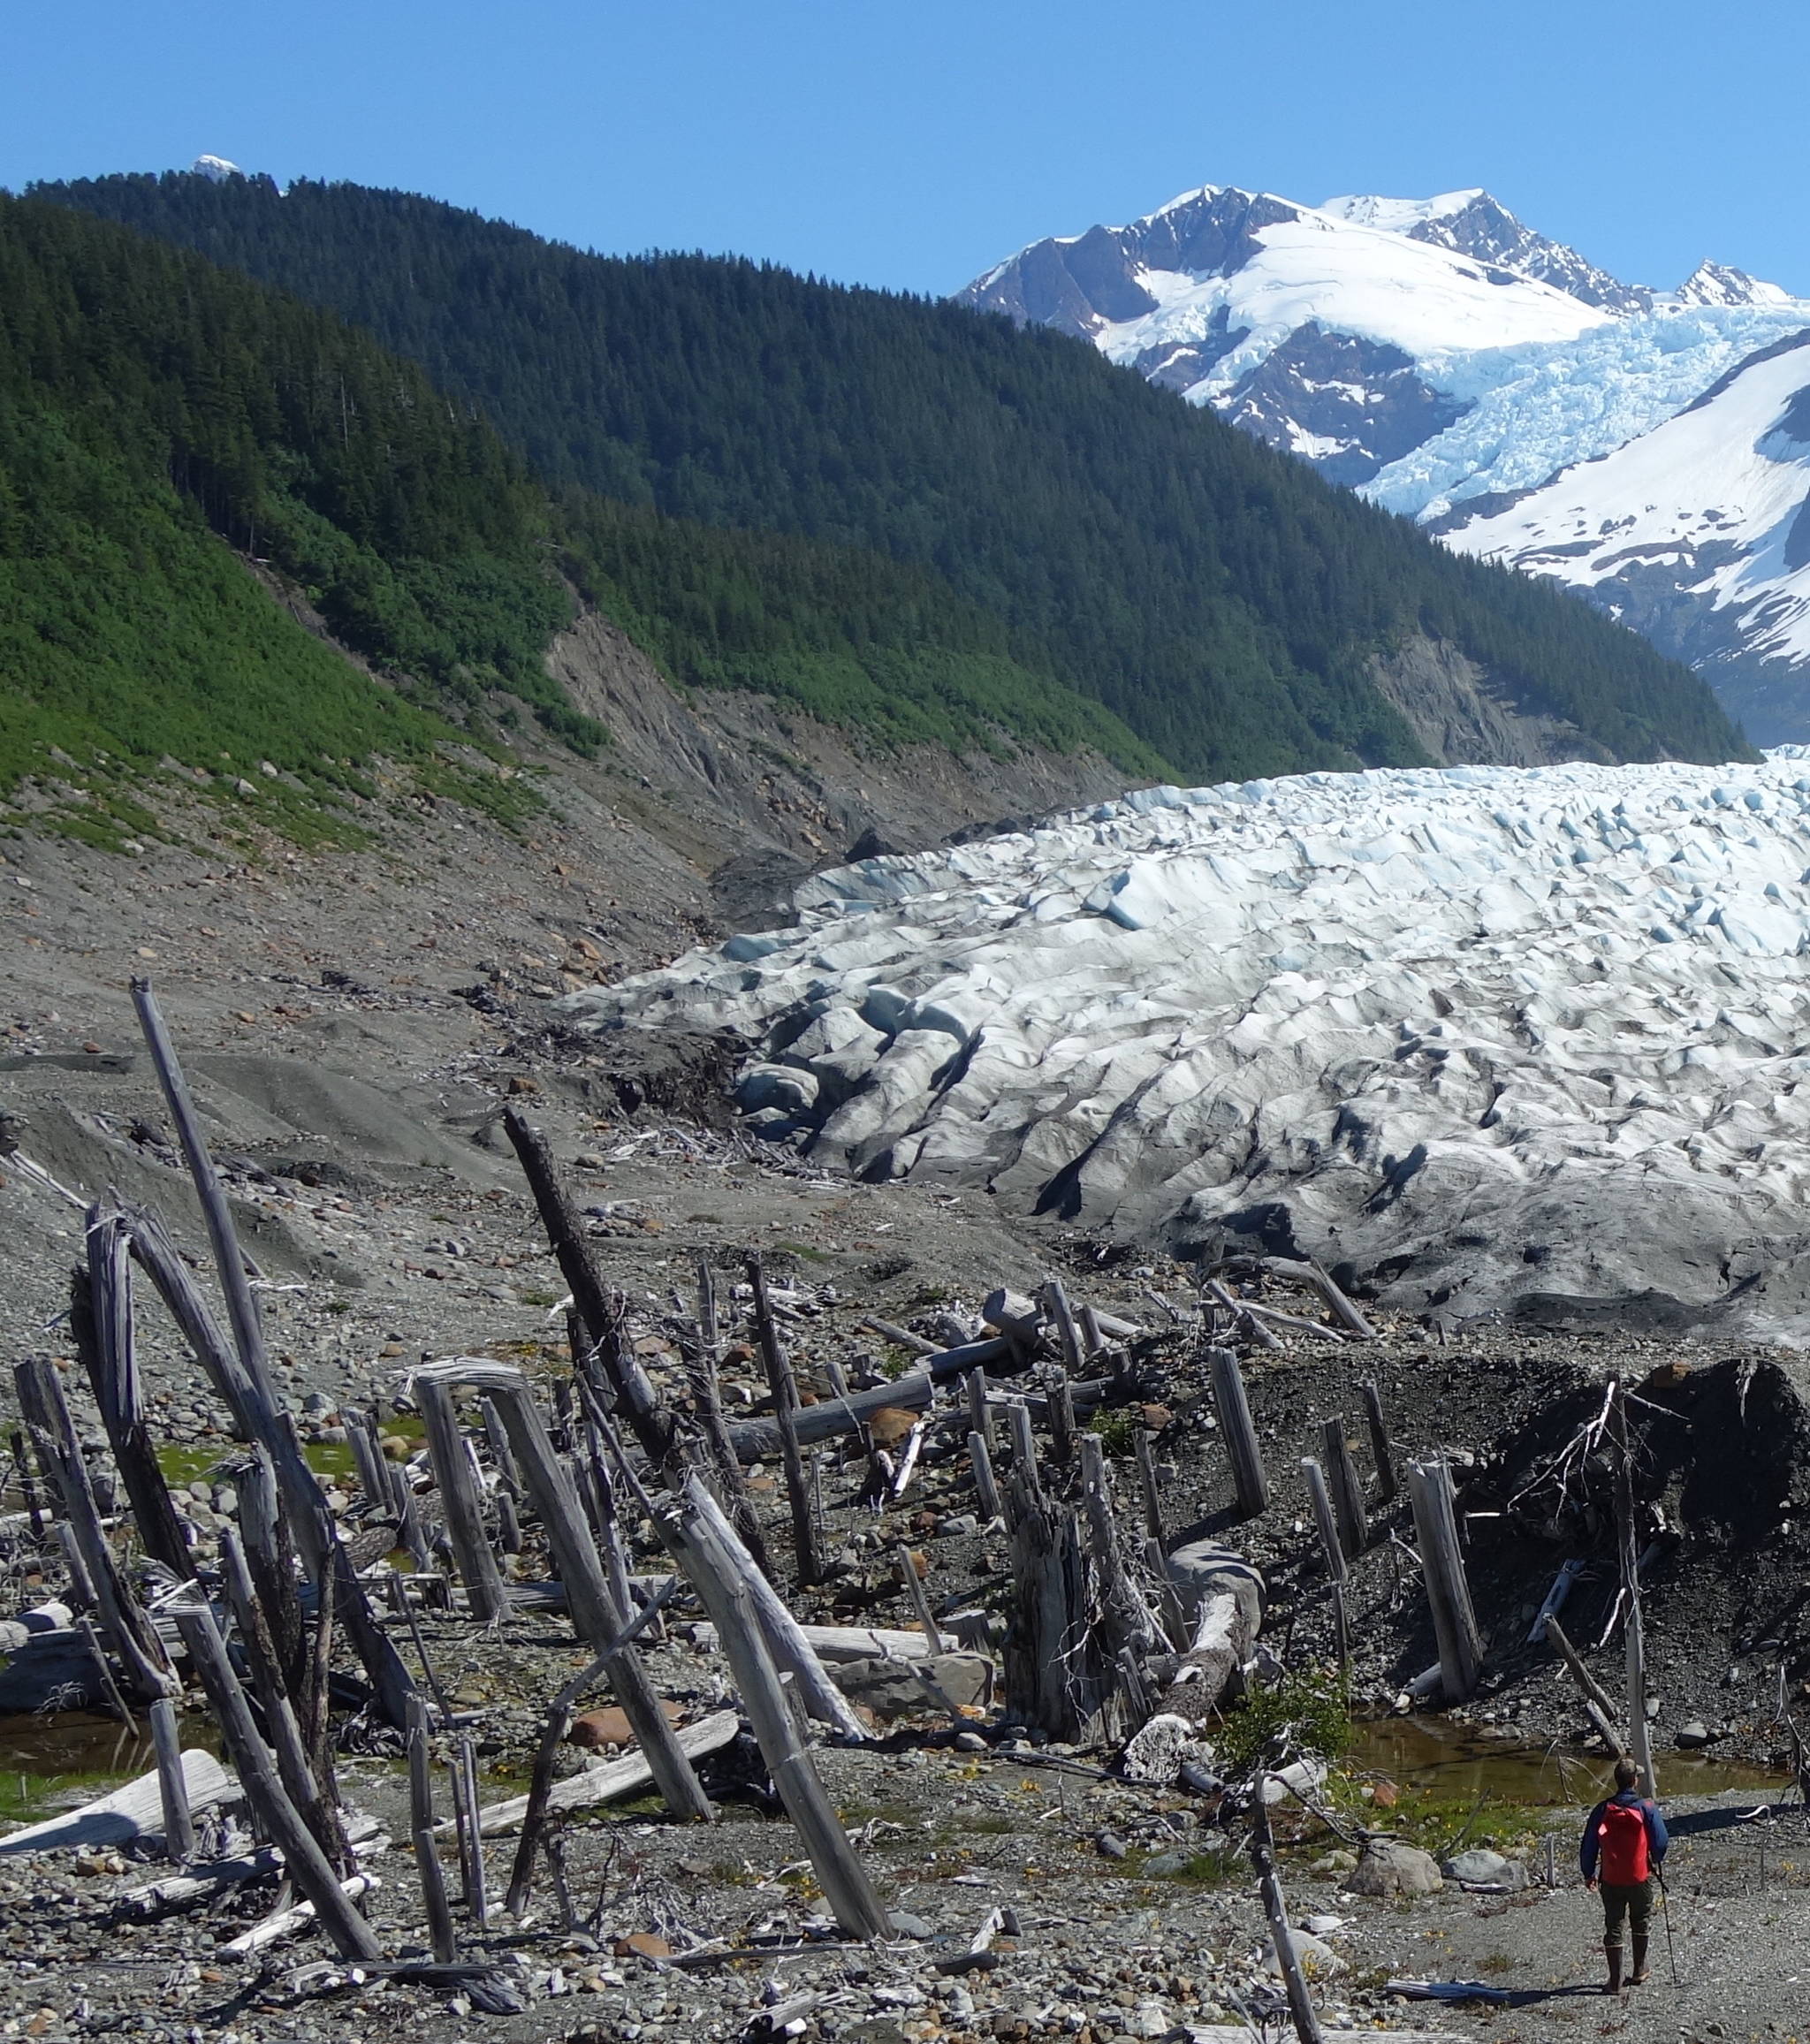 Ben Gaglioti walks to a ghost forest near the tongue of La Perouse Glacier, which ran over the trees during the Civil War.(Courtesy Photo/ Ned Rozell)